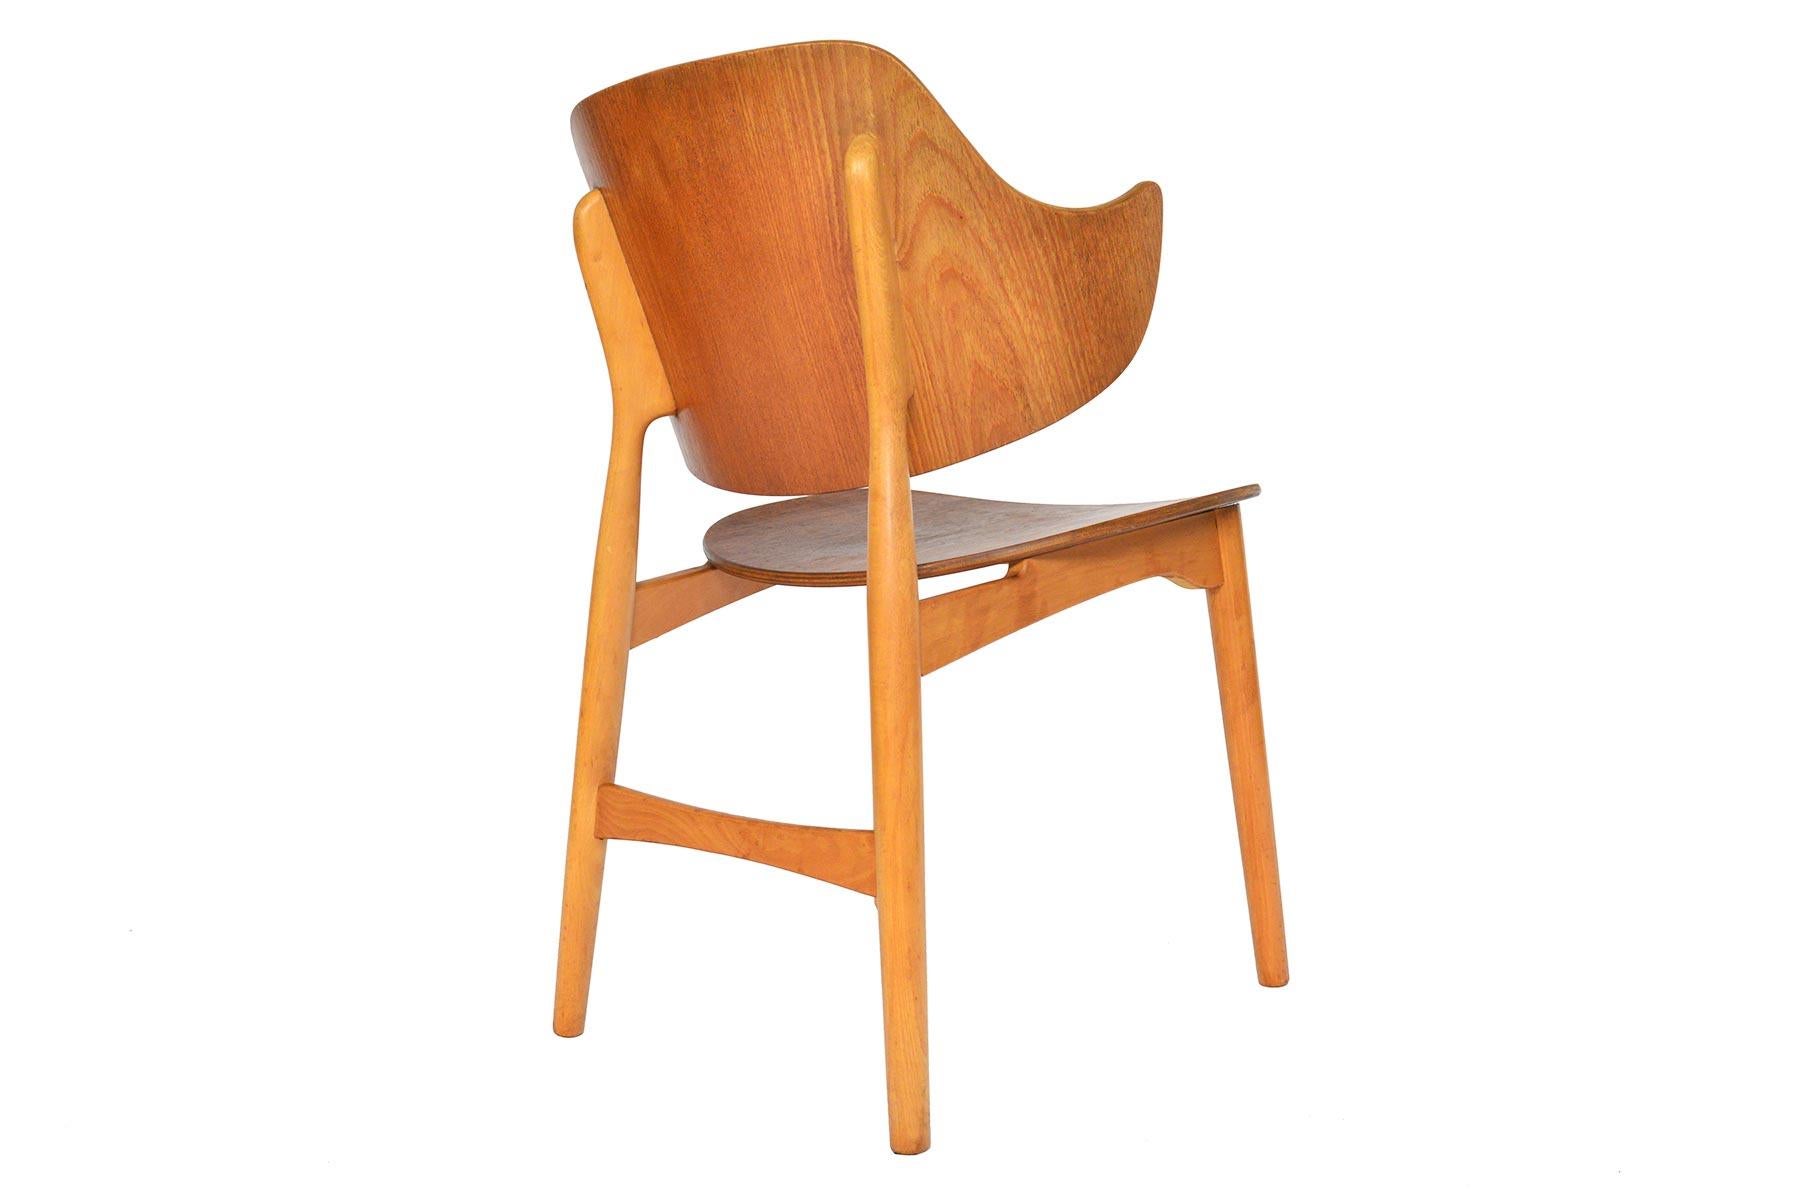 This charming teak side chair Model 307 was designed in 1953 by Jens Hjorth for Randers Stolefabrik. A bent teak backrest and seat bottom are supported by an oak frame. In excellent condition.

